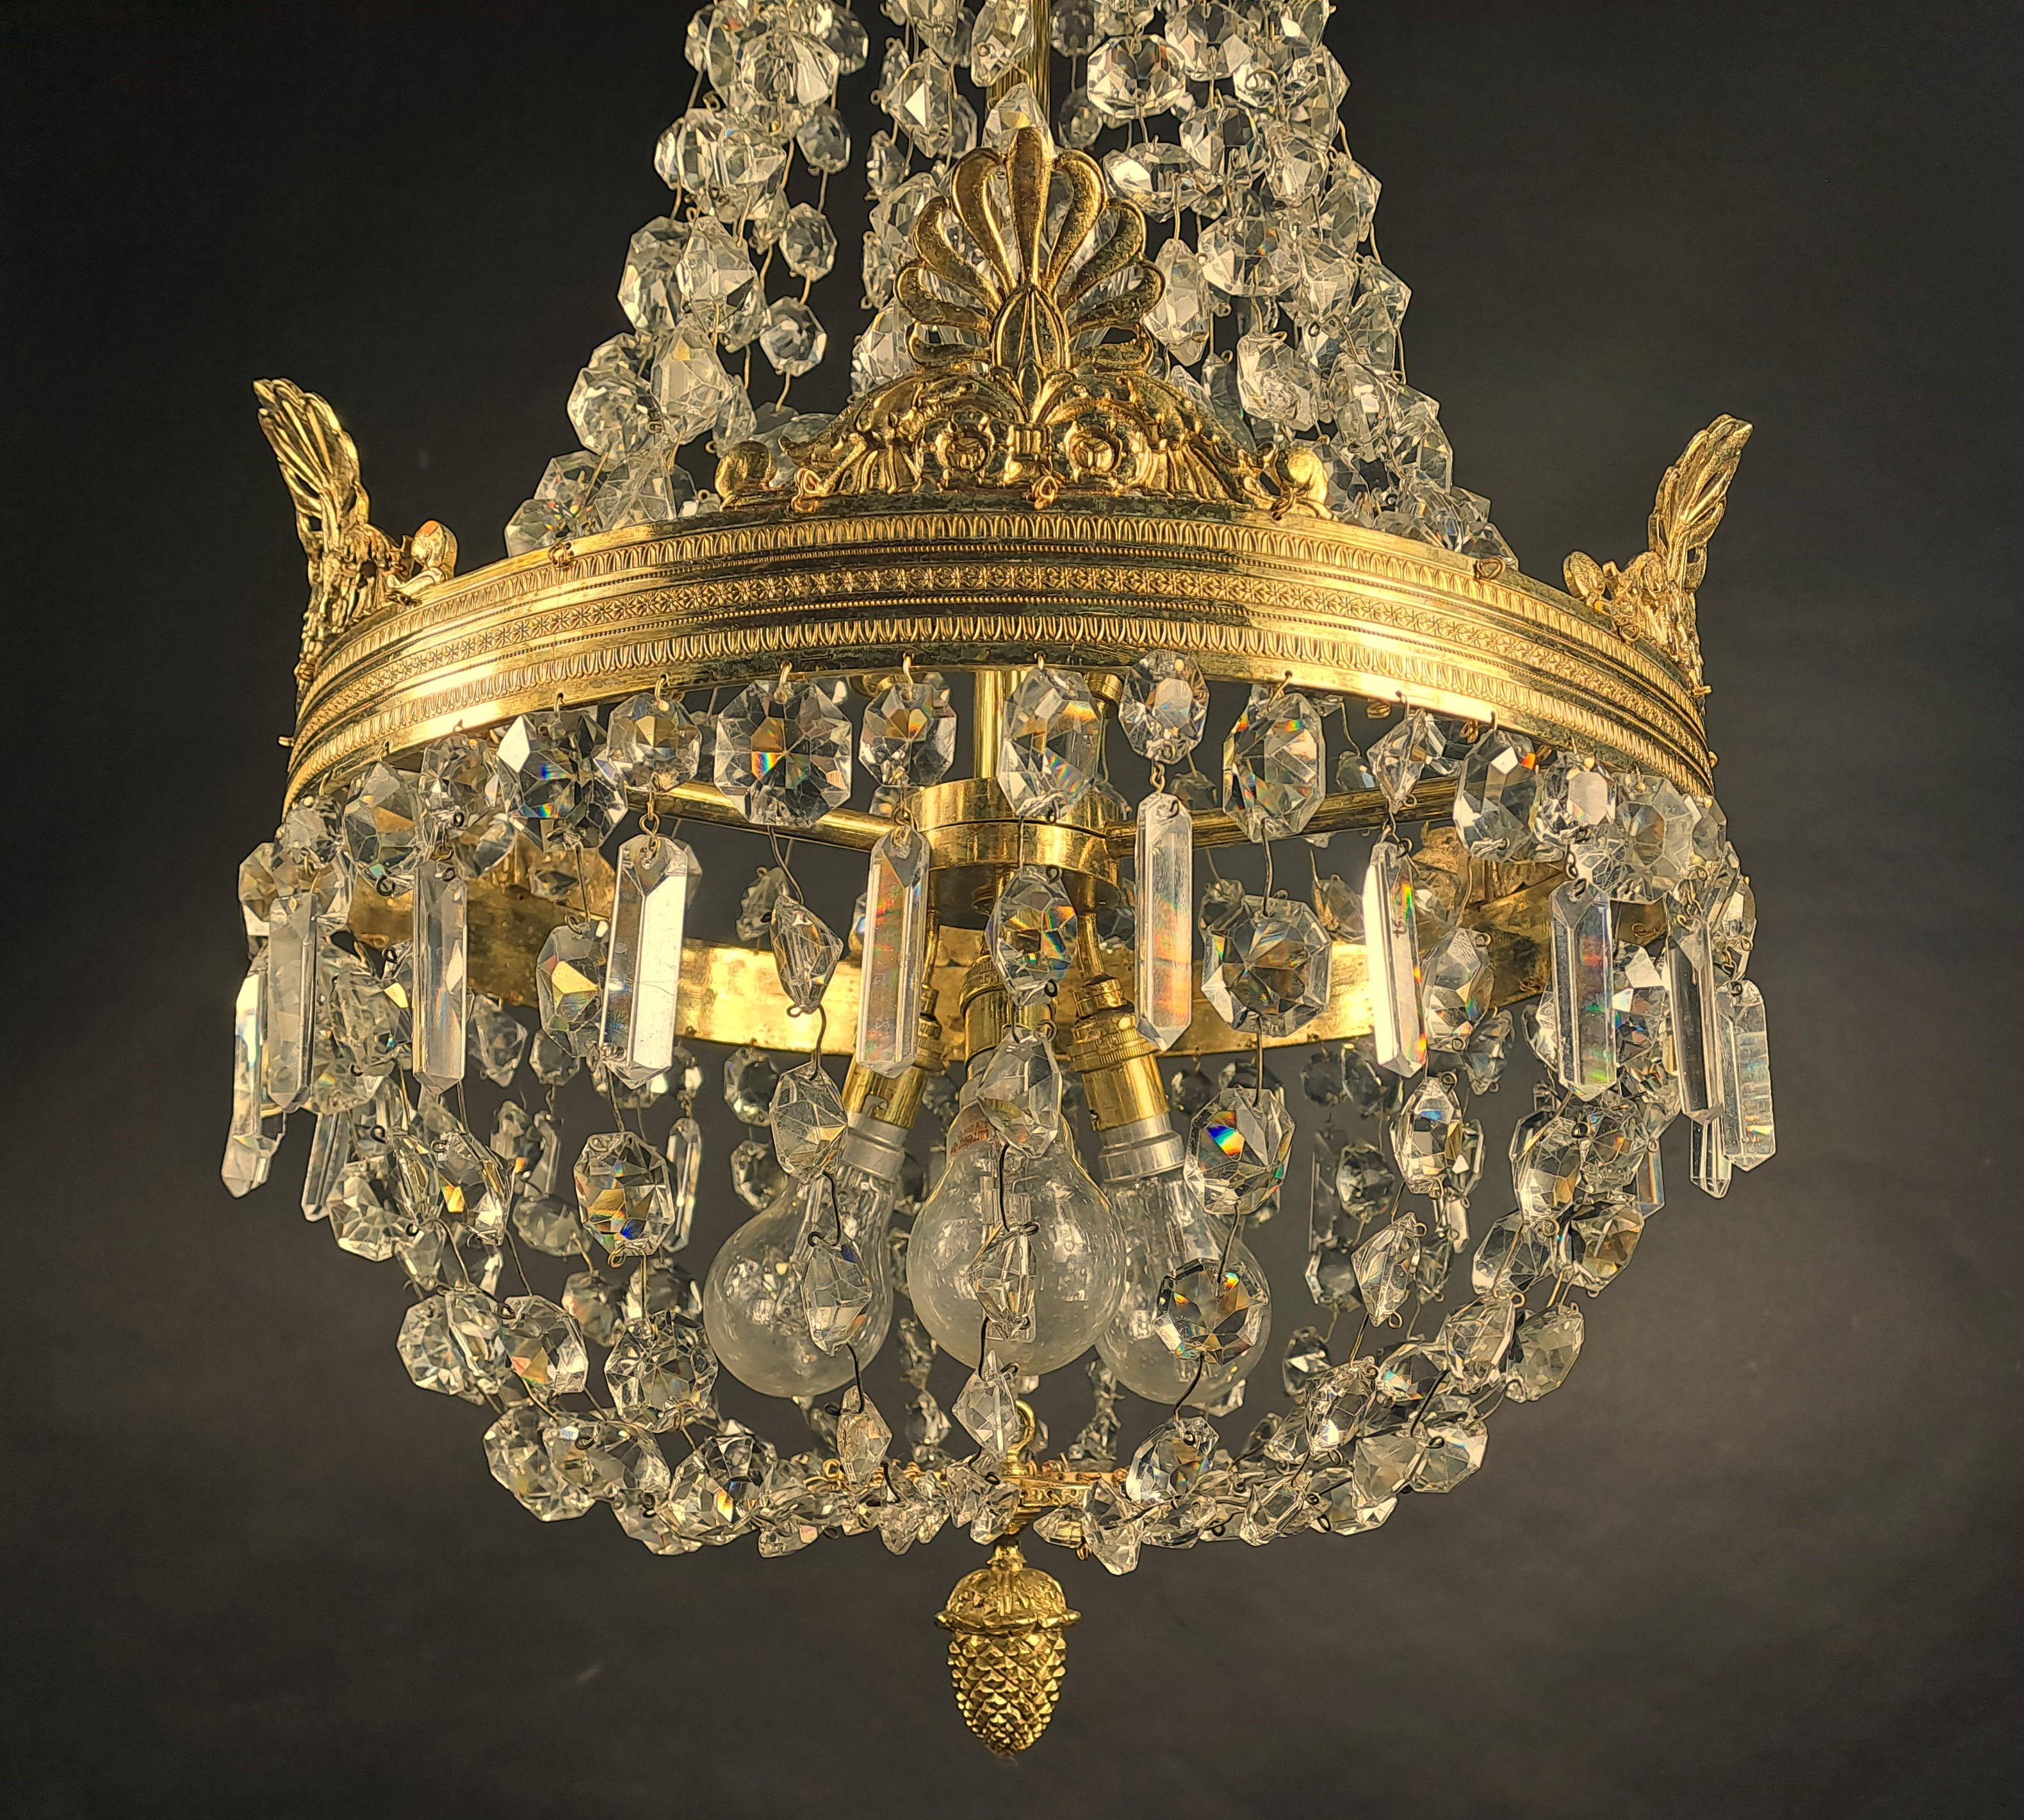 20th Century Empire Style Hot Air Balloon Chandelier In Gilt Bronze And Crystal For Sale